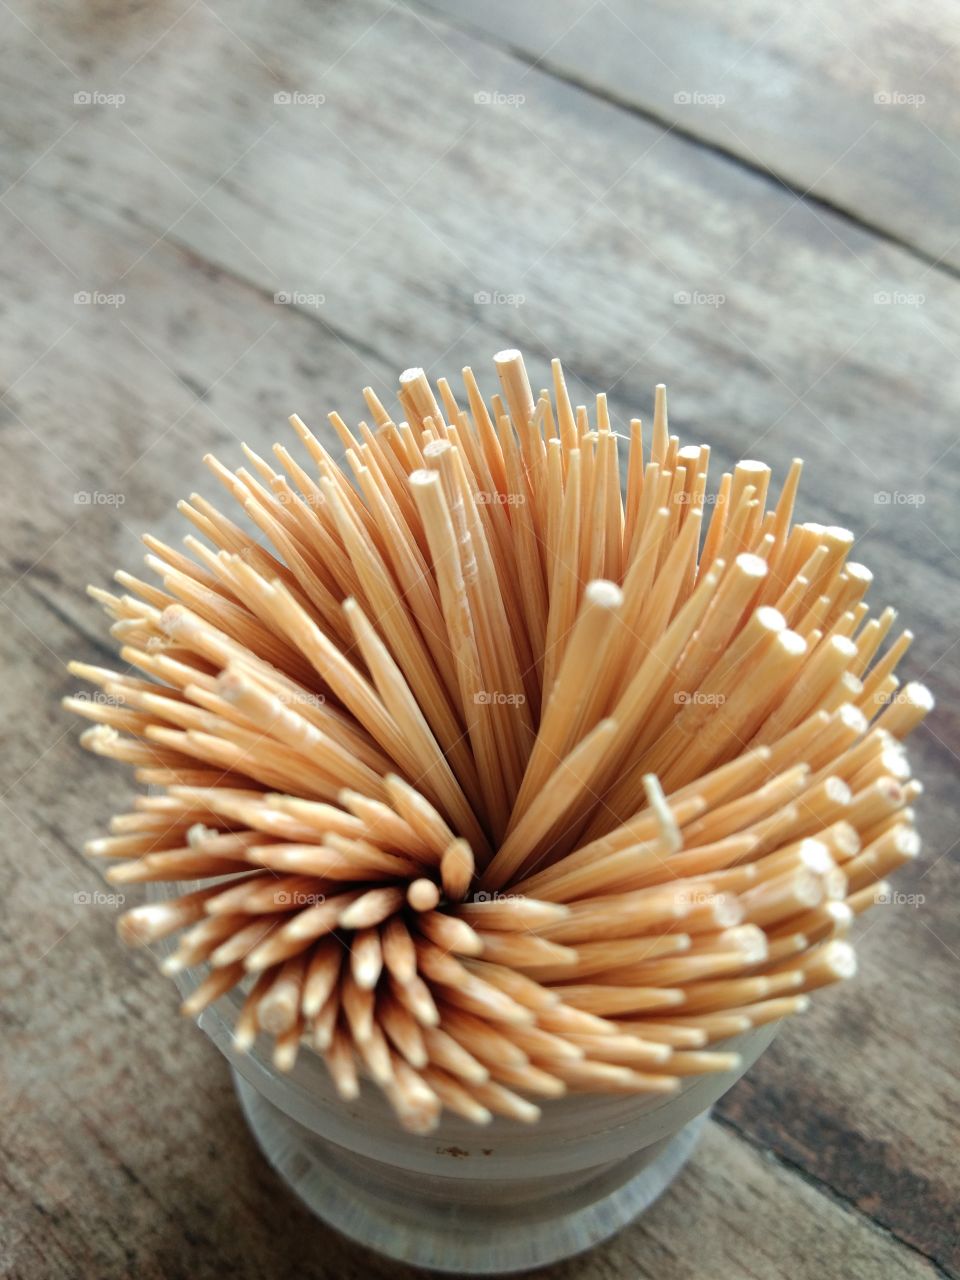 bamboo toothpicks on the table